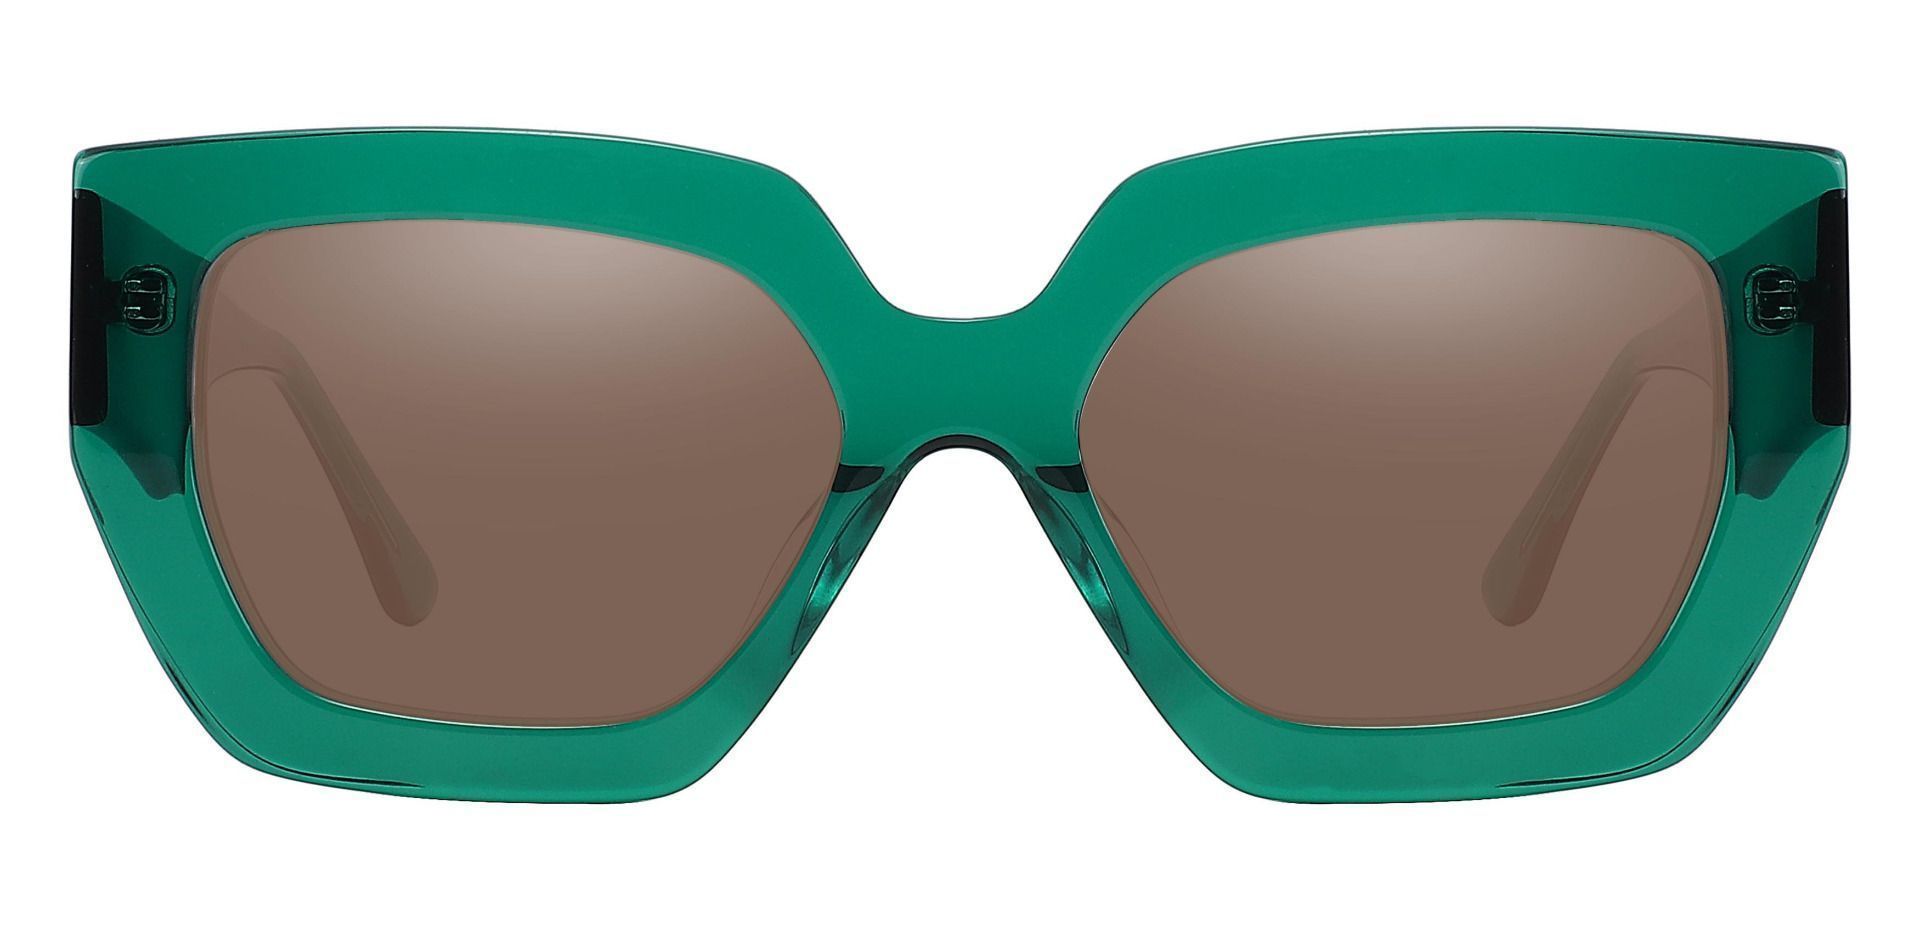 Moses Geometric Reading Sunglasses - Green Frame With Brown Lenses